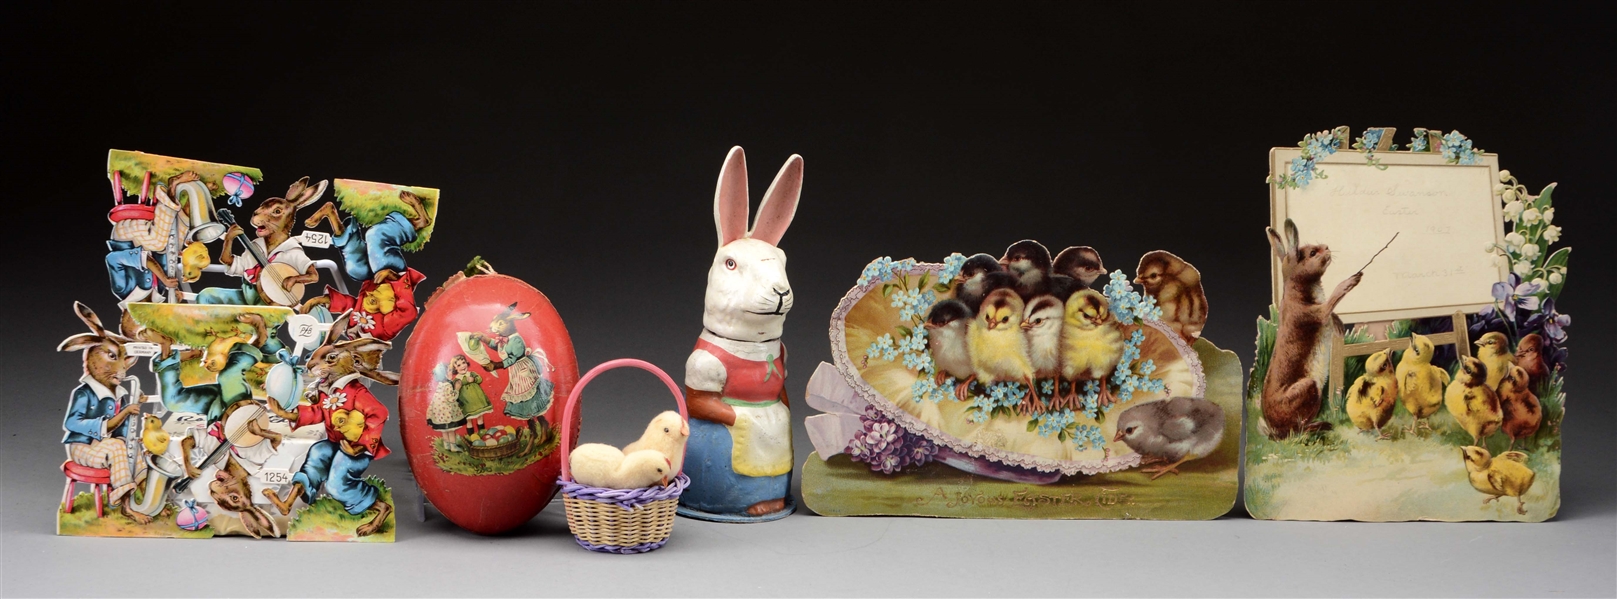 LOT OF 5: ASSORTED EASTER DECORATIONS.